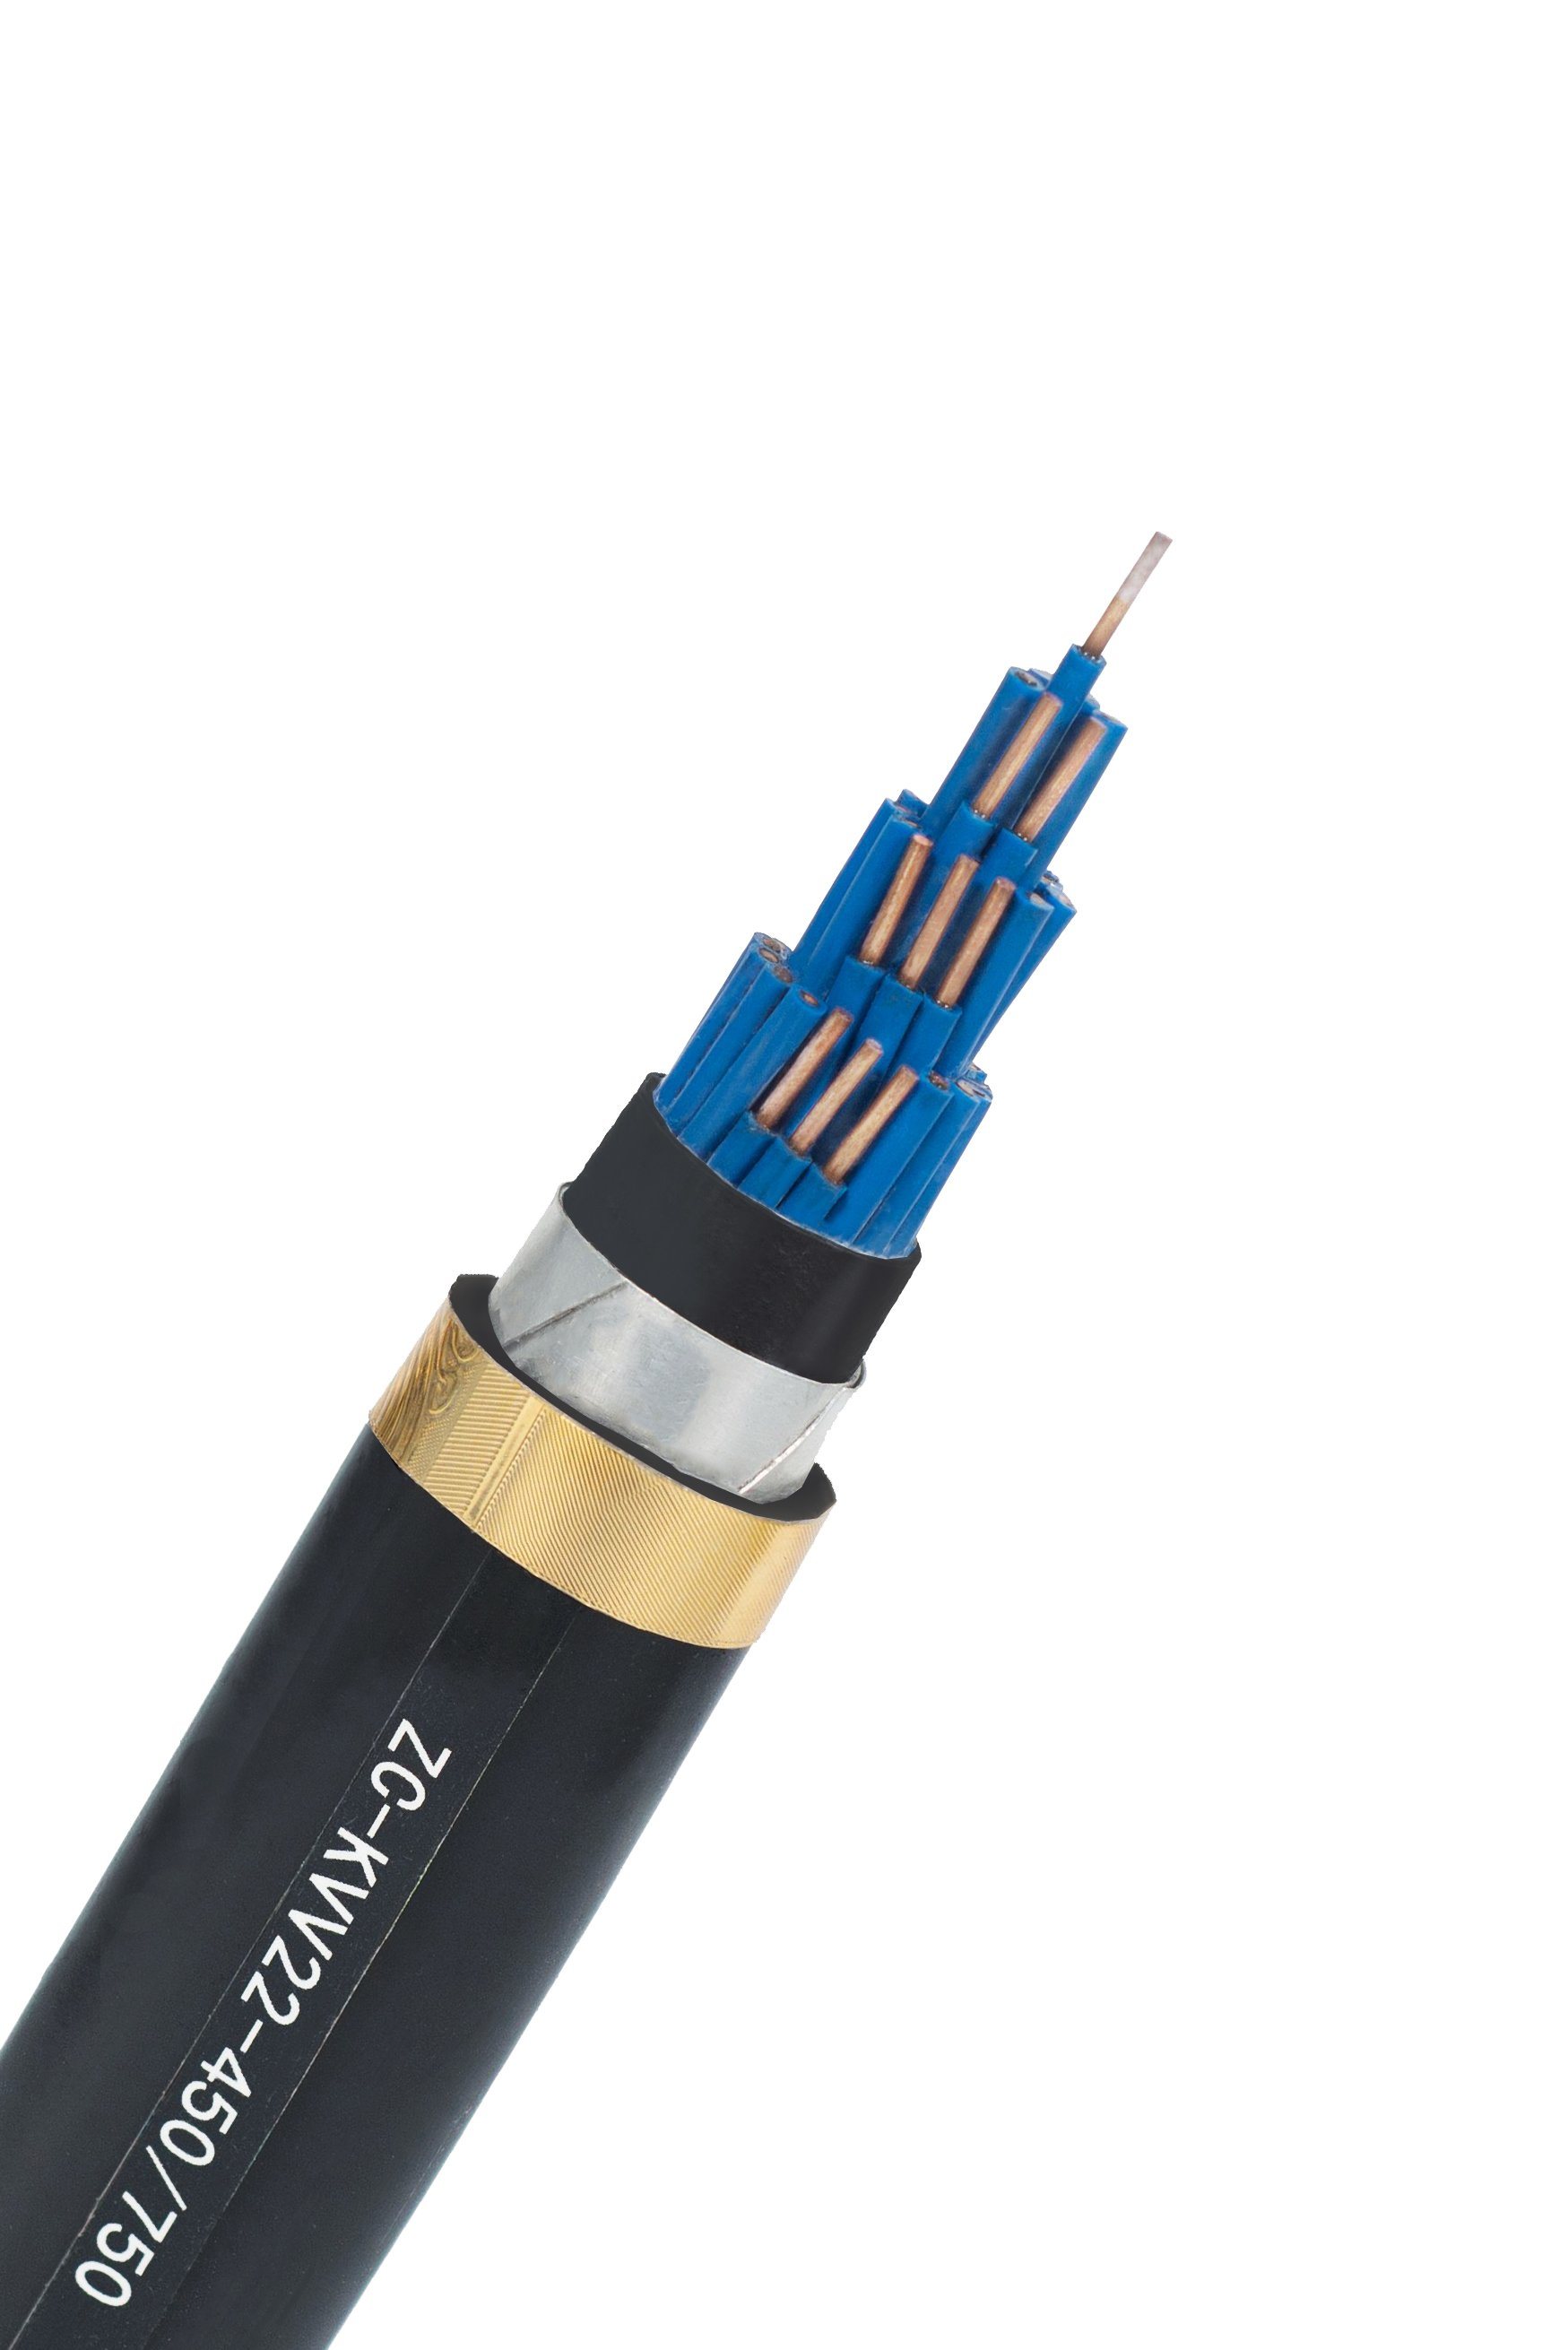 High Quality Pure Copper Shielded Wire Multi Core Shielded Control Cable Shielded Control Electric Cable Wire 2/2.5mm Cable Wire